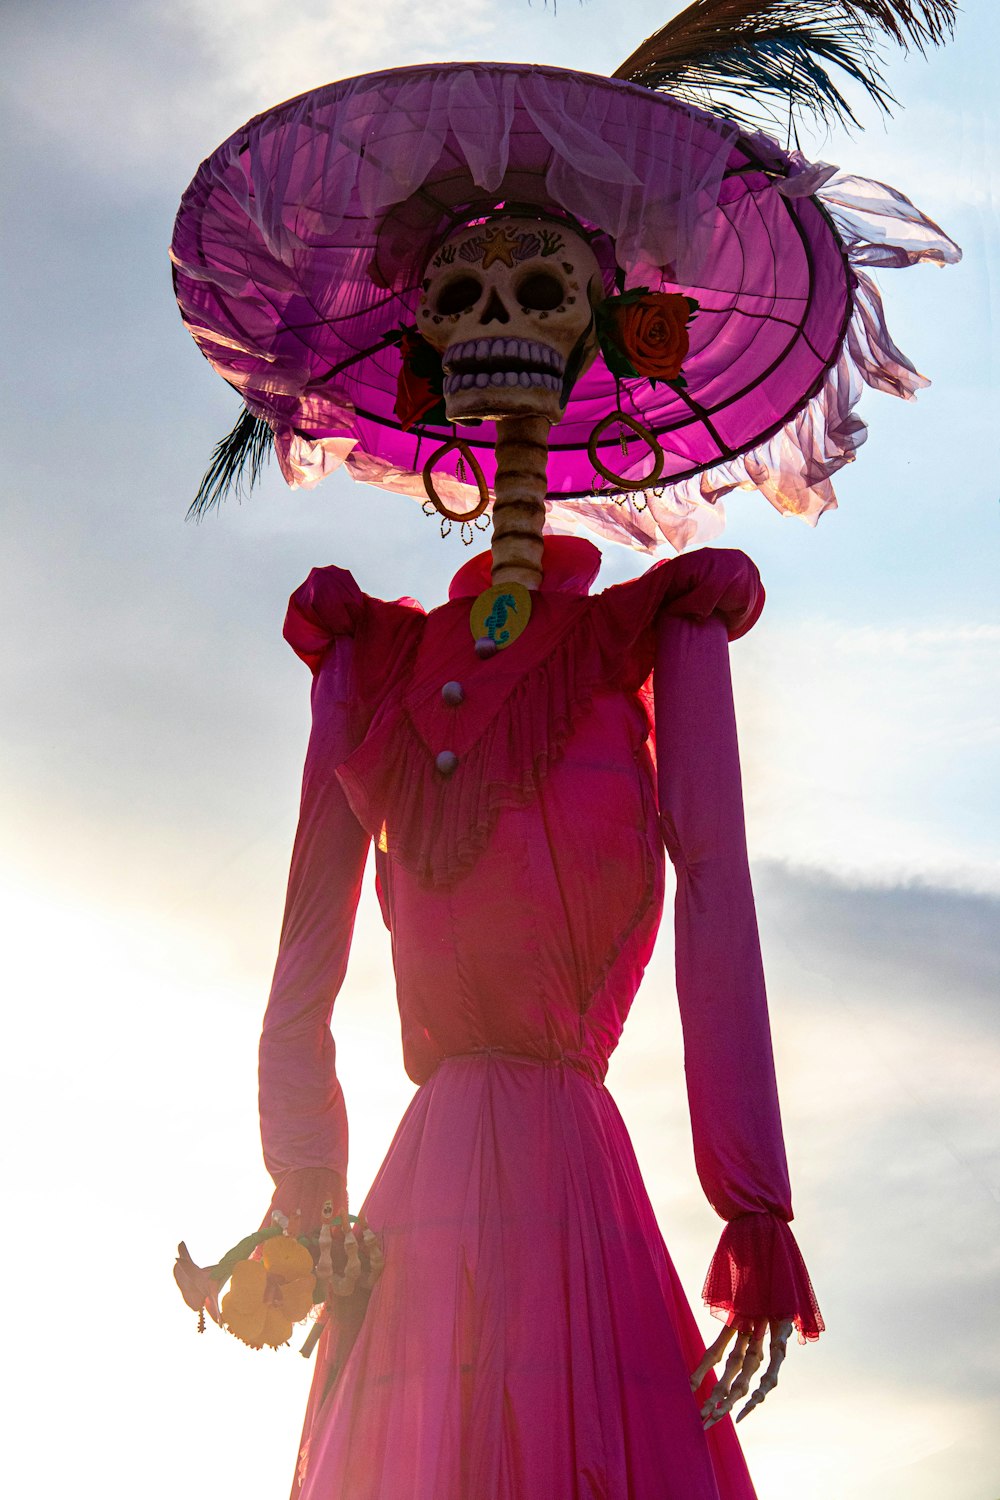 a skeleton wearing a pink dress and hat